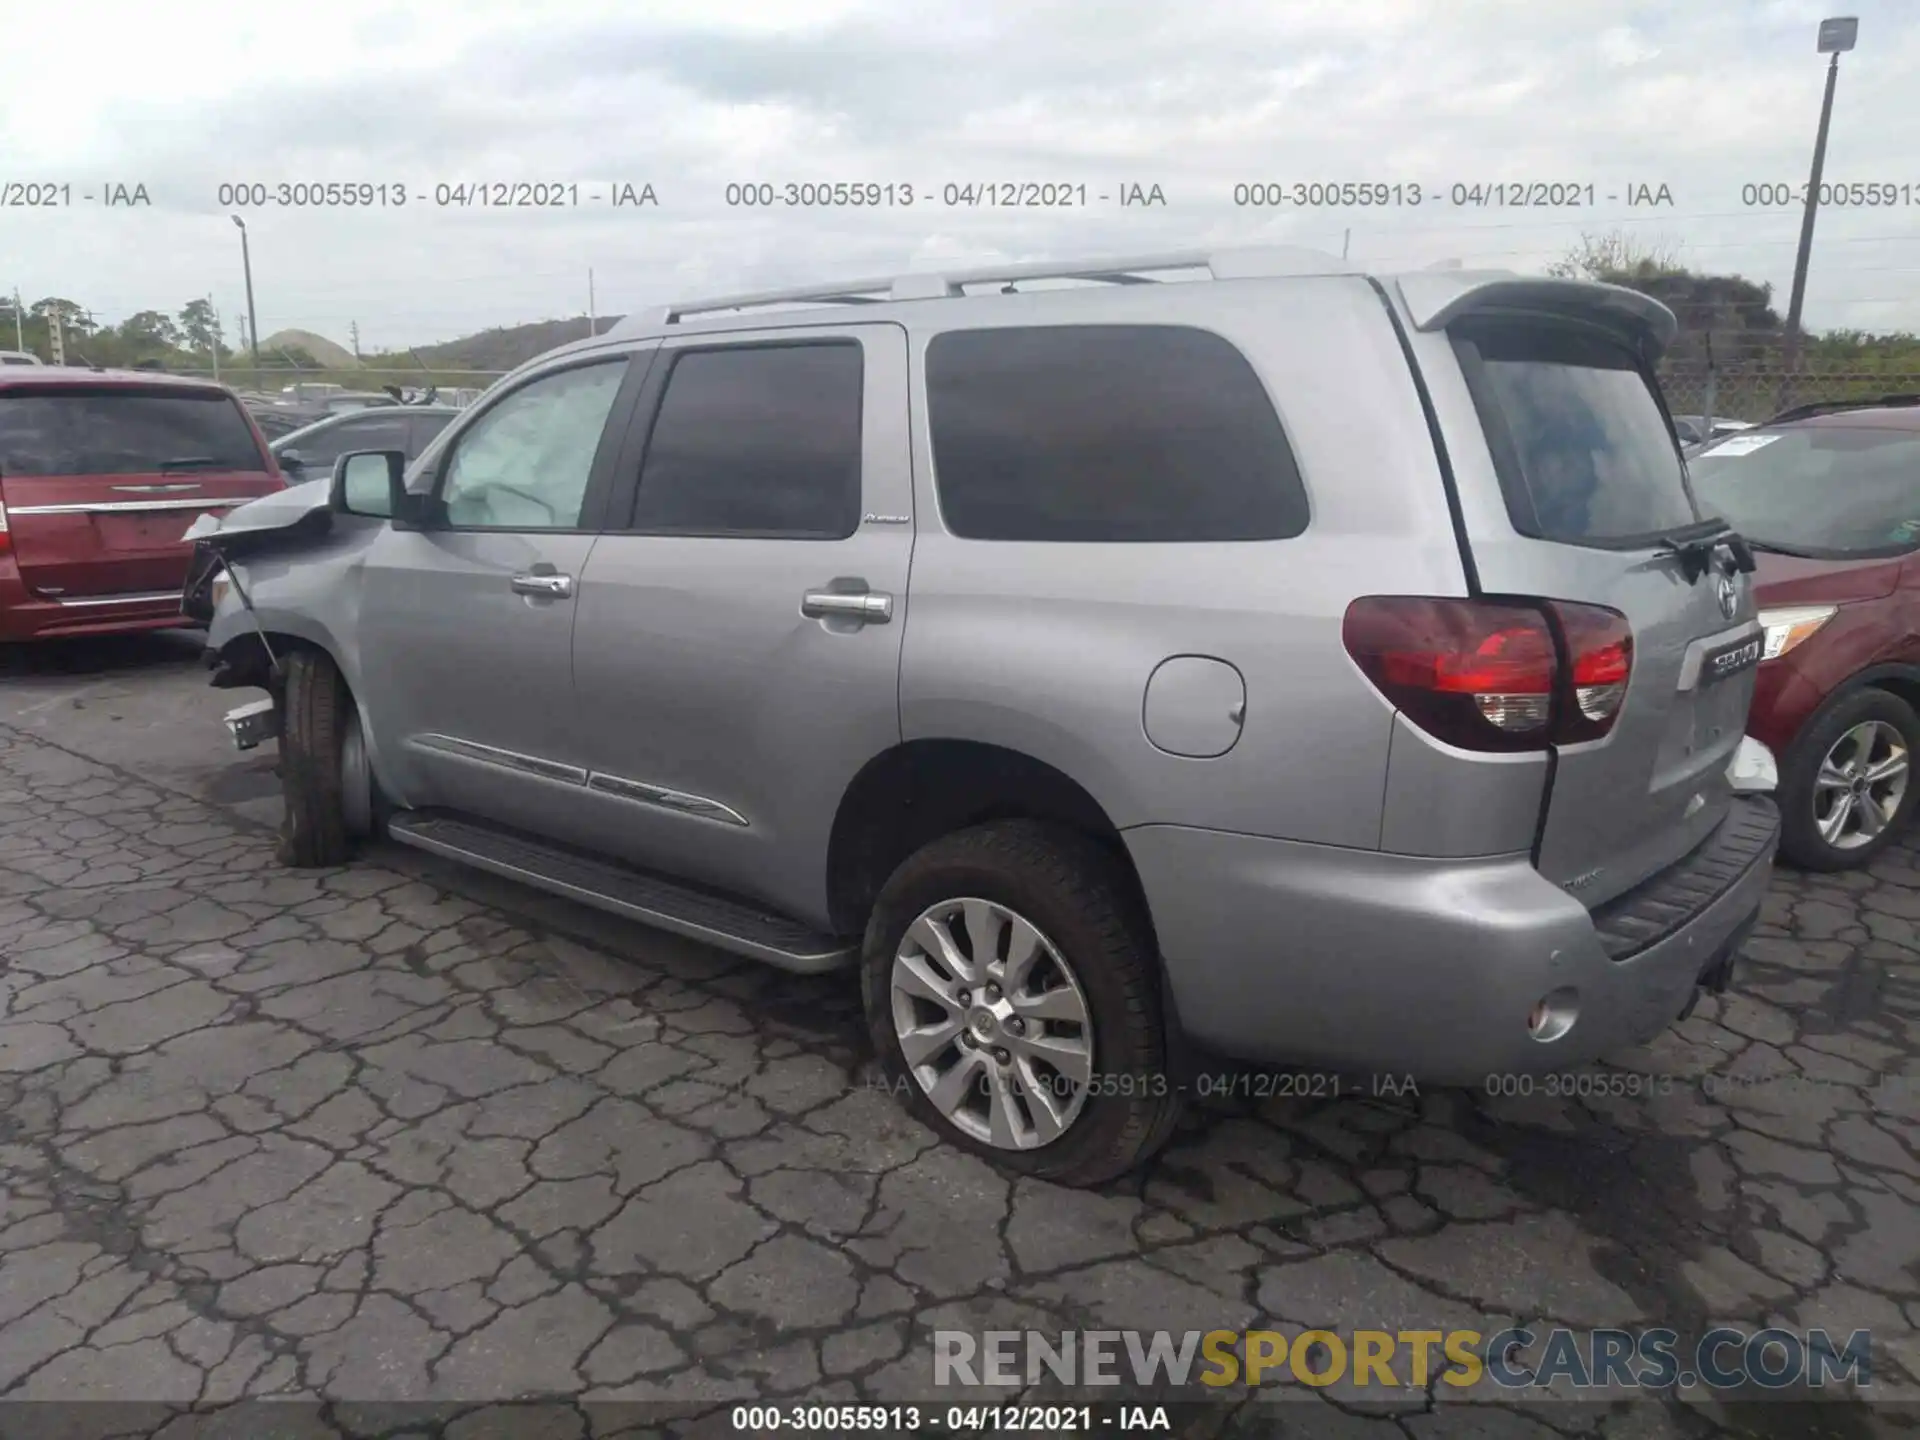 3 Photograph of a damaged car 5TDDY5G11LS181276 TOYOTA SEQUOIA 2020